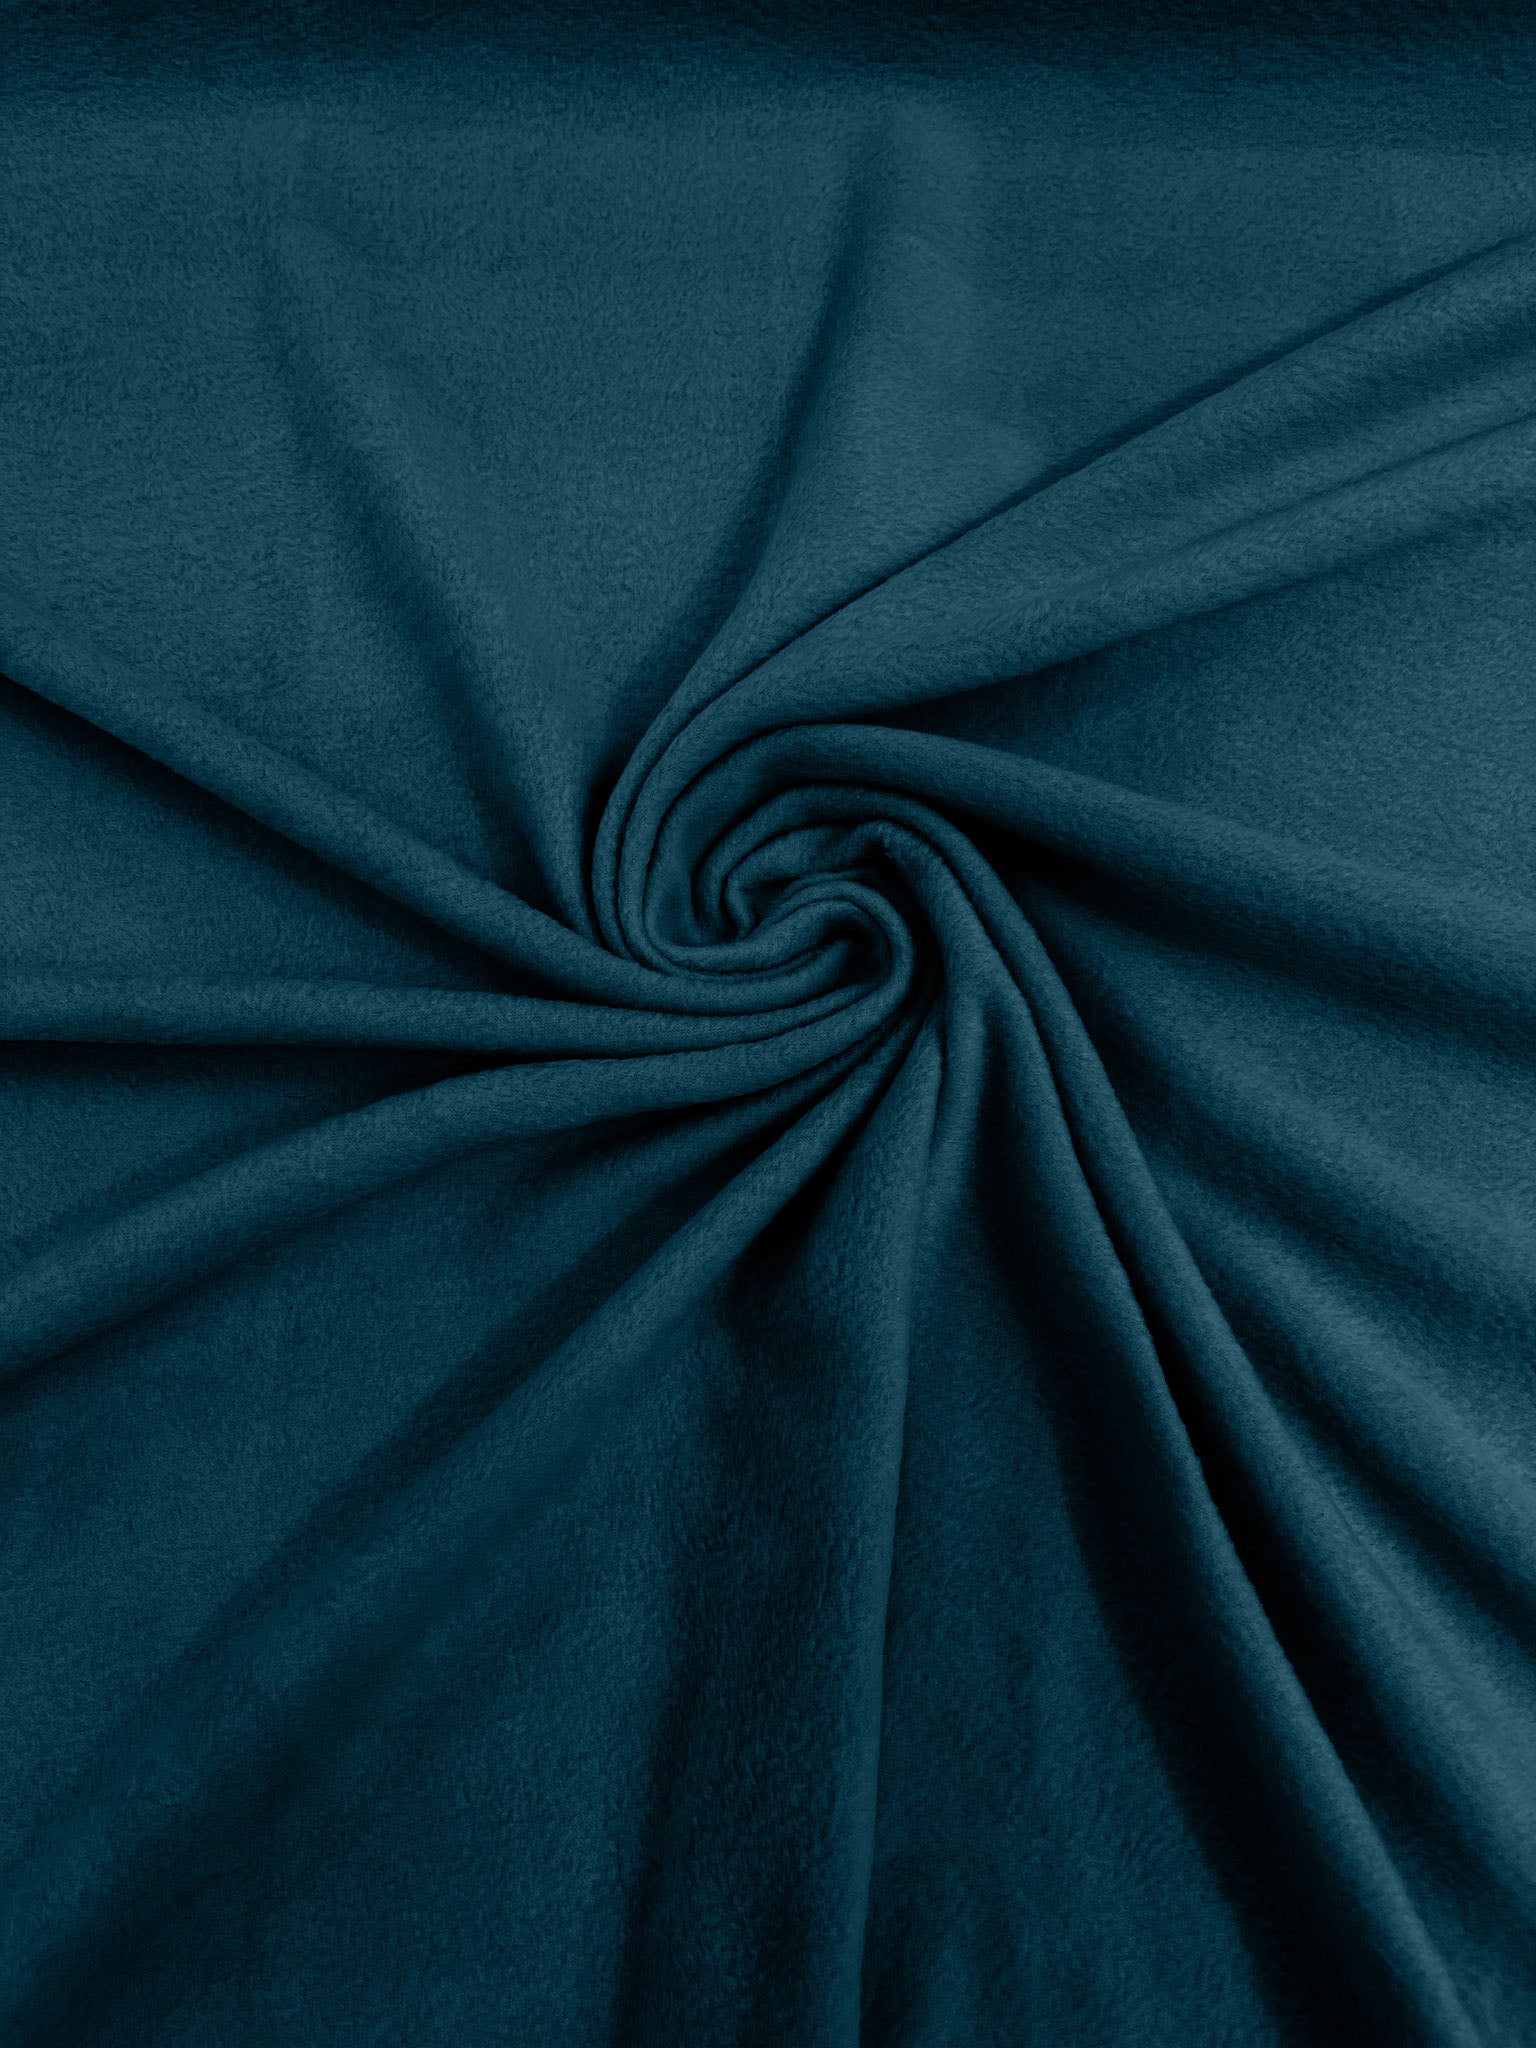 Teal Blue Solid Polar Fleece Fabric Anti-Pill 58" Wide Sold by The Yard